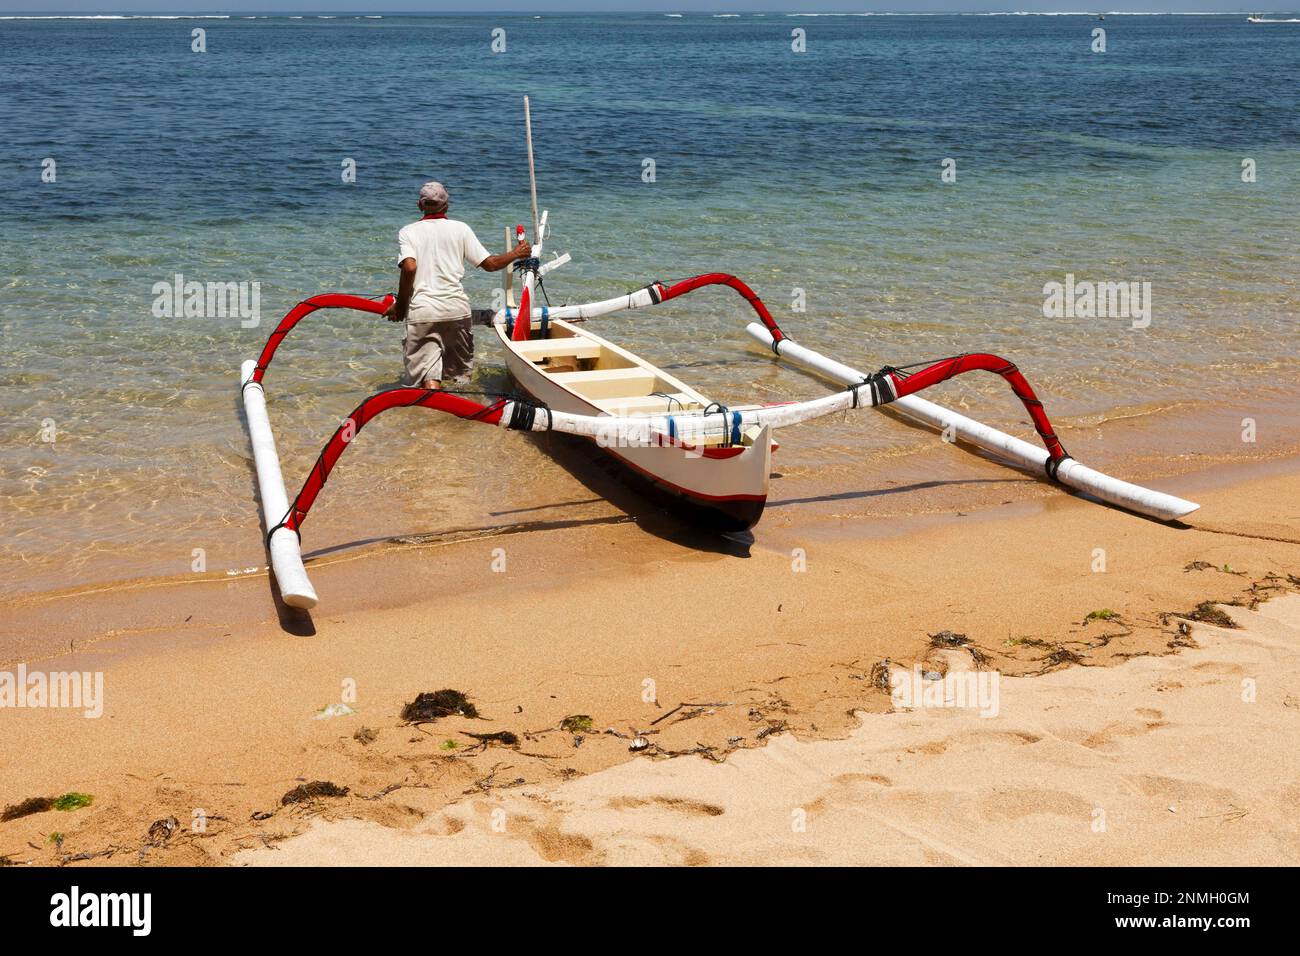 https://c8.alamy.com/comp/2NMH0GM/fishing-outriggers-on-the-beach-of-sanur-bali-indonesia-2NMH0GM.jpg